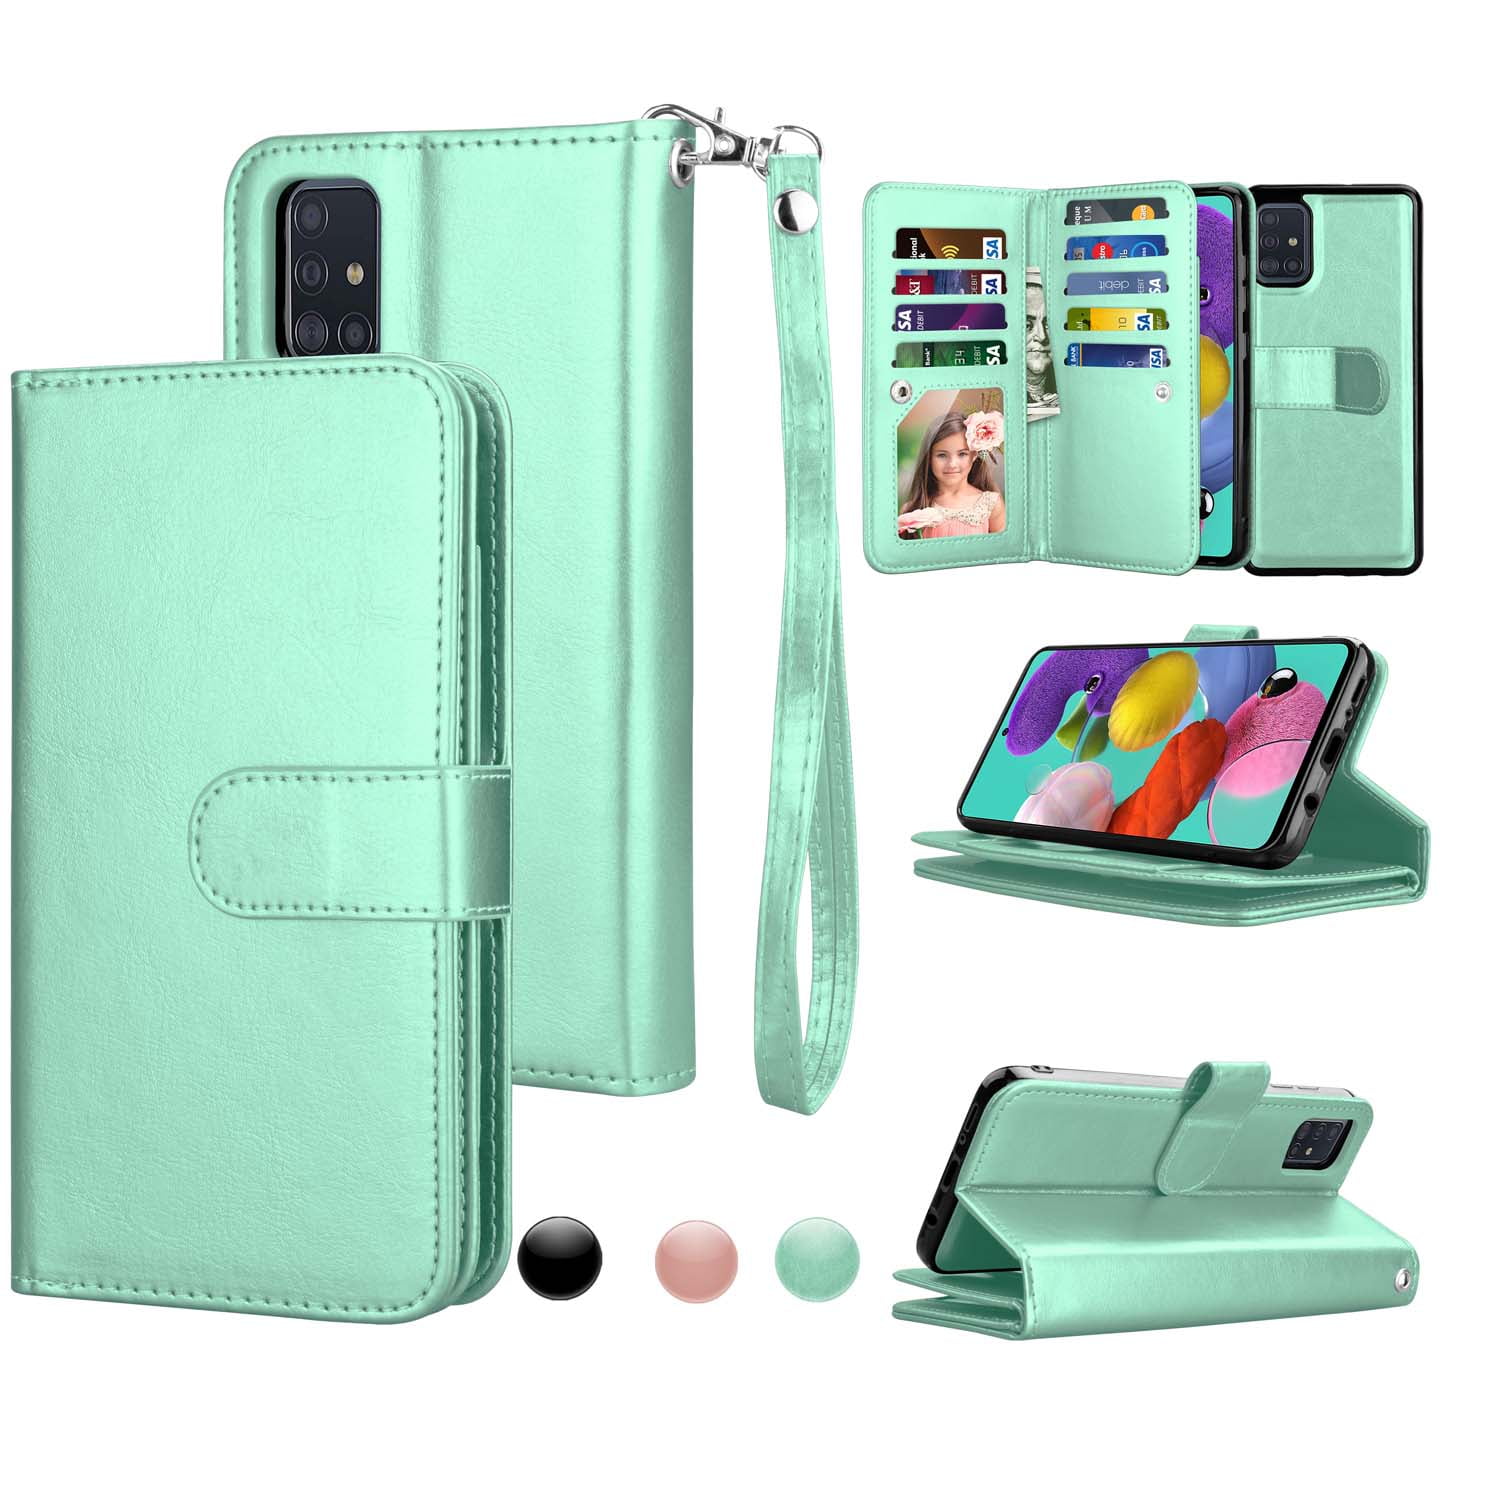 Gostyle Case for Samsung Galaxy A70,Flip Wallet Case Blue with 9 Credit Card Holders Slots,Premium Leather Magnetic Stand Cover with Zipper Pocket and Hand Strap